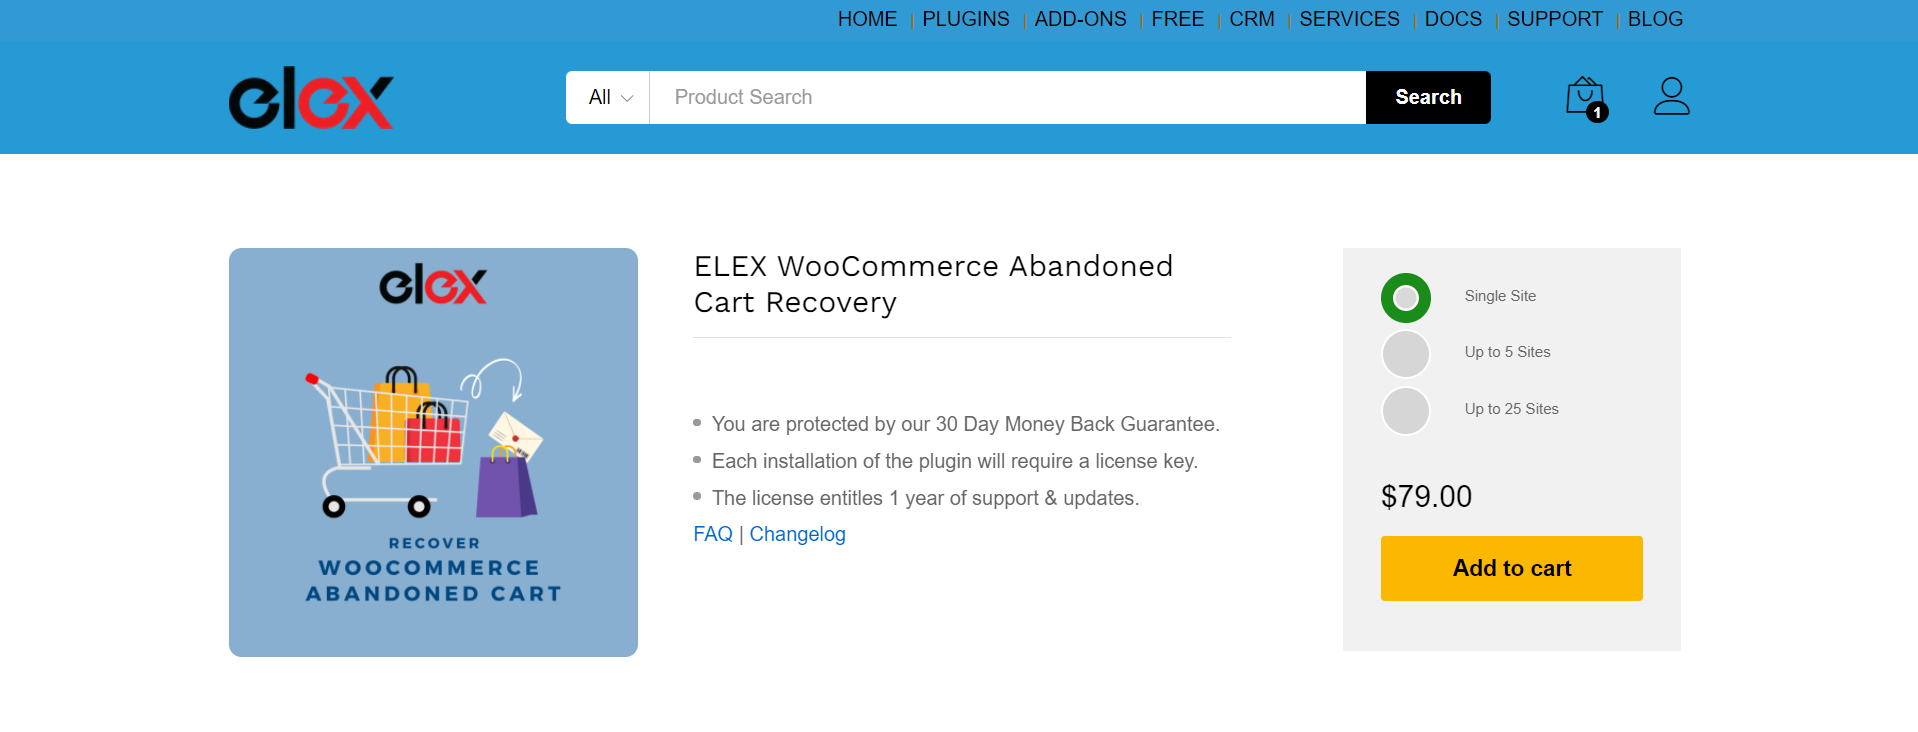 ELEX Abandoned Cart Recovery plugin product page with a price of $79